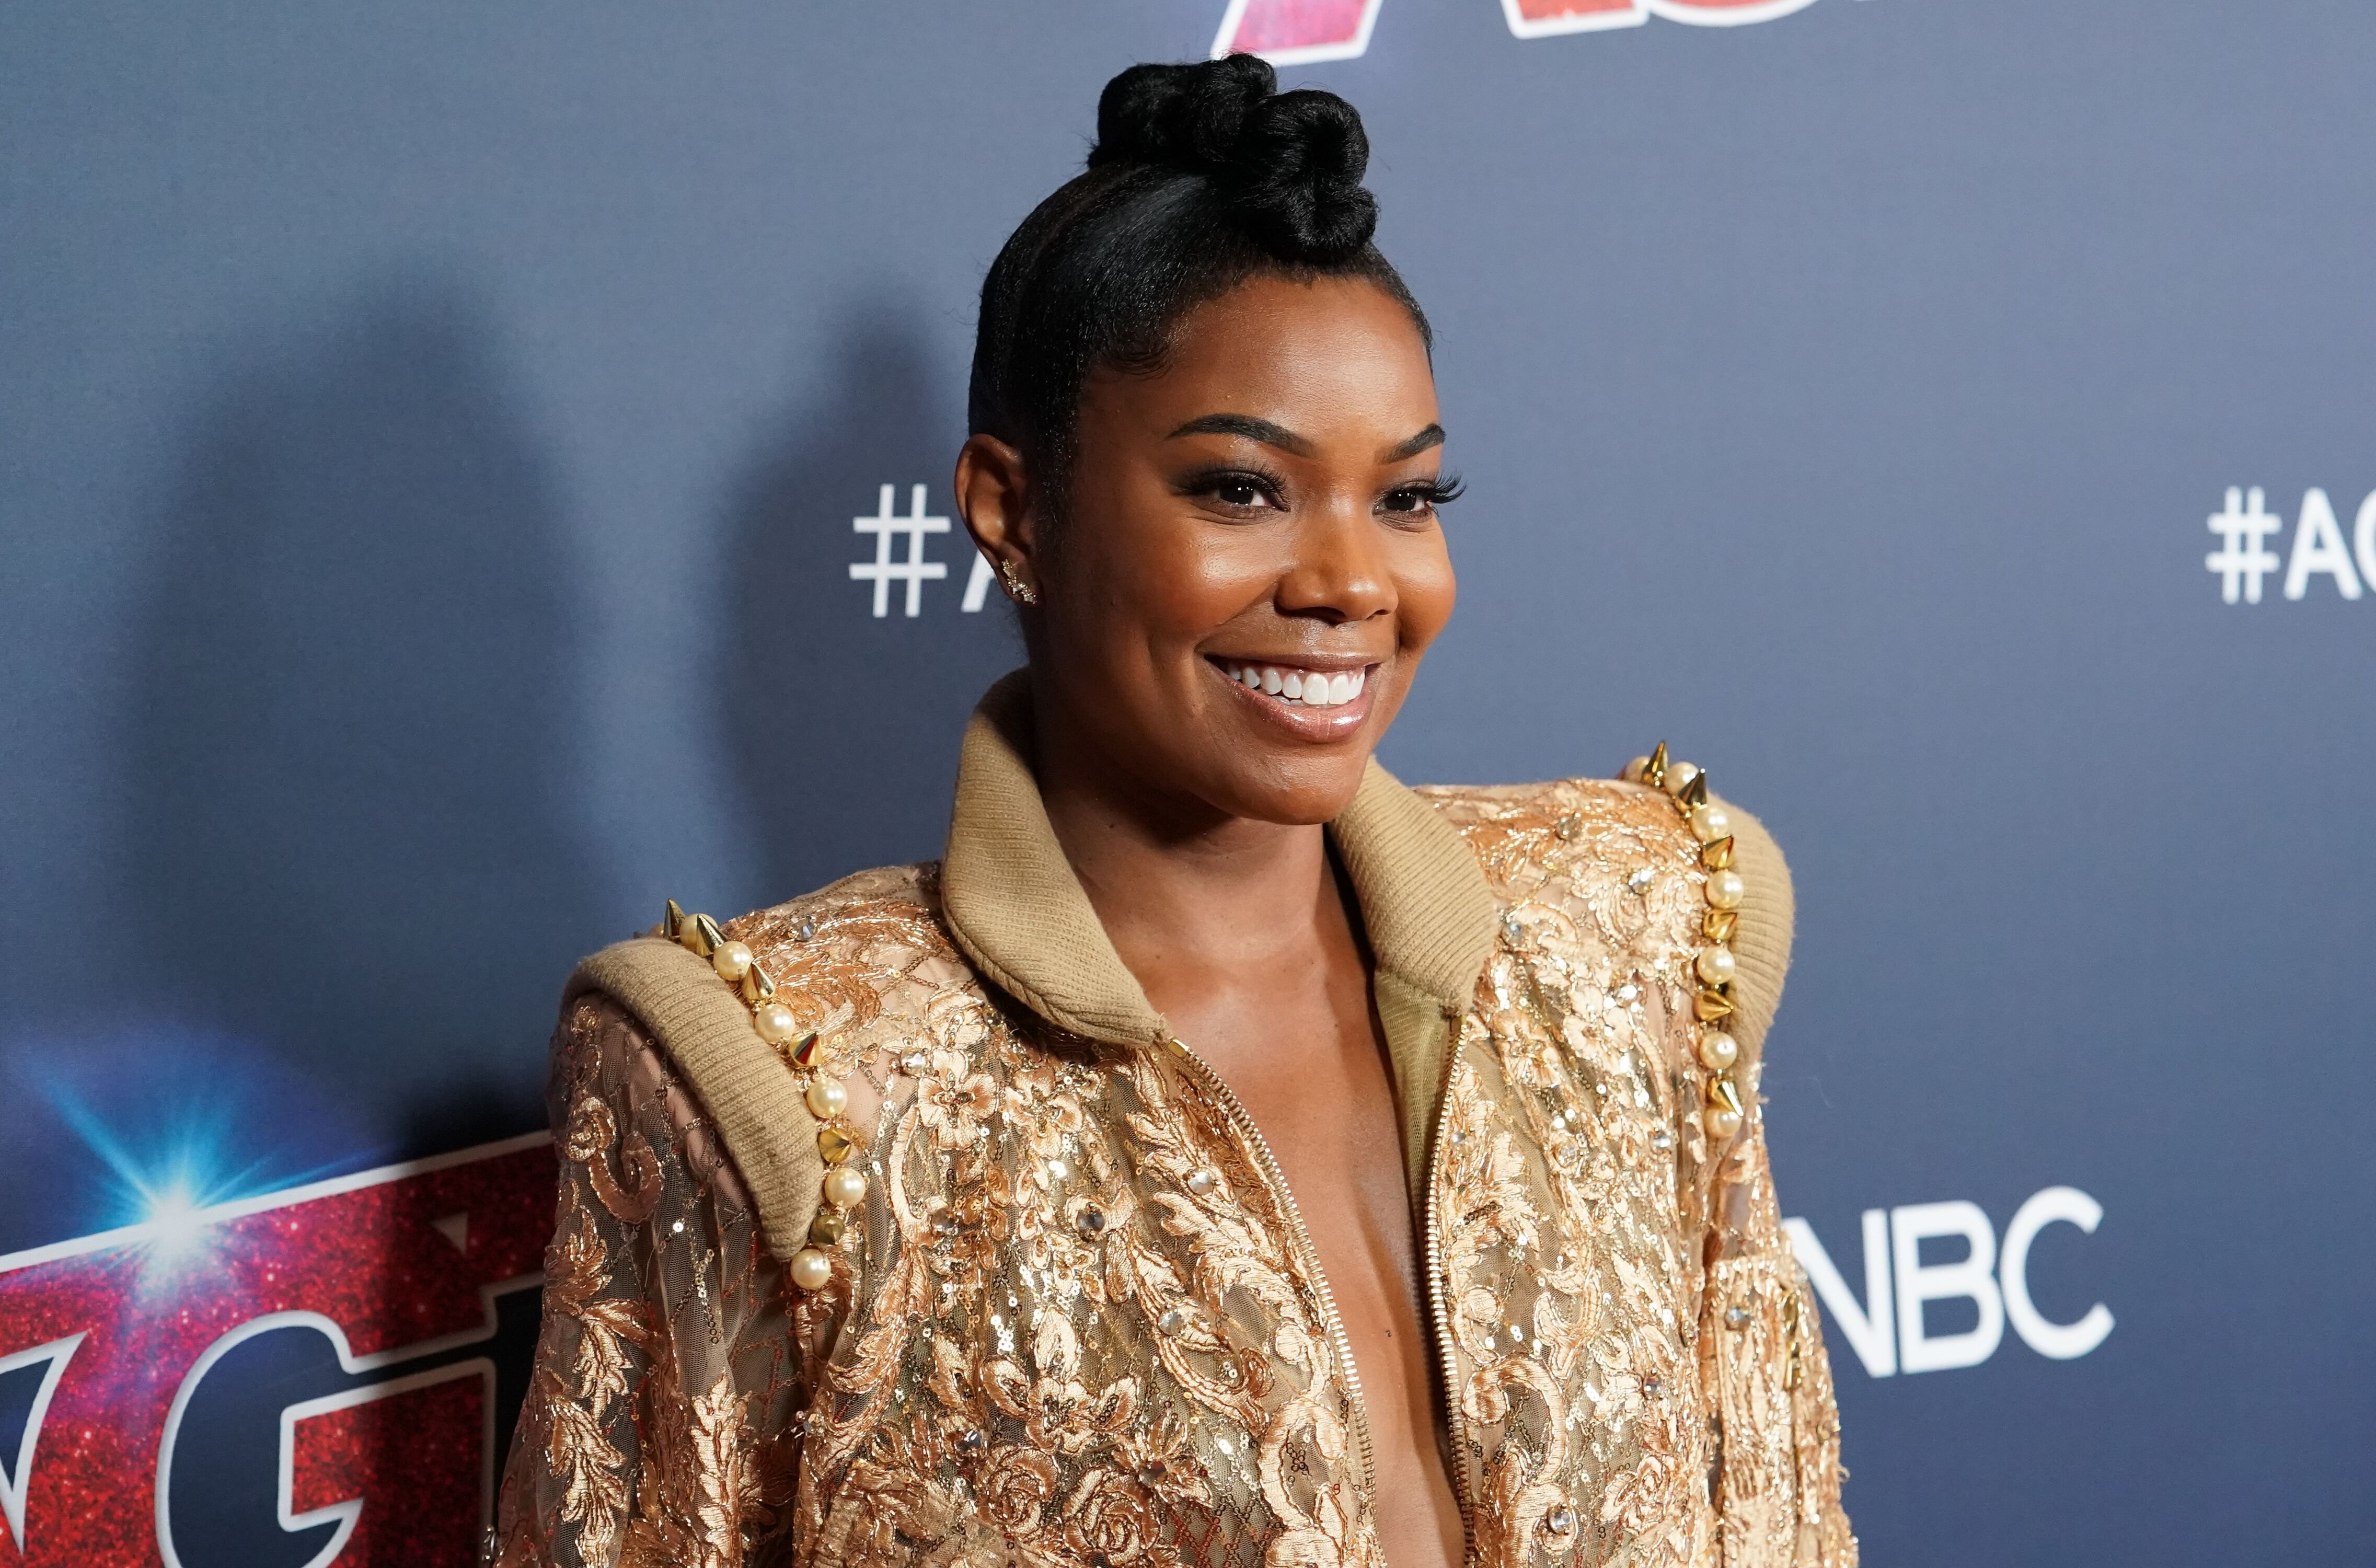 Gabrielle Union at the "America's Got Talent" premiere/ Source: Getty Images